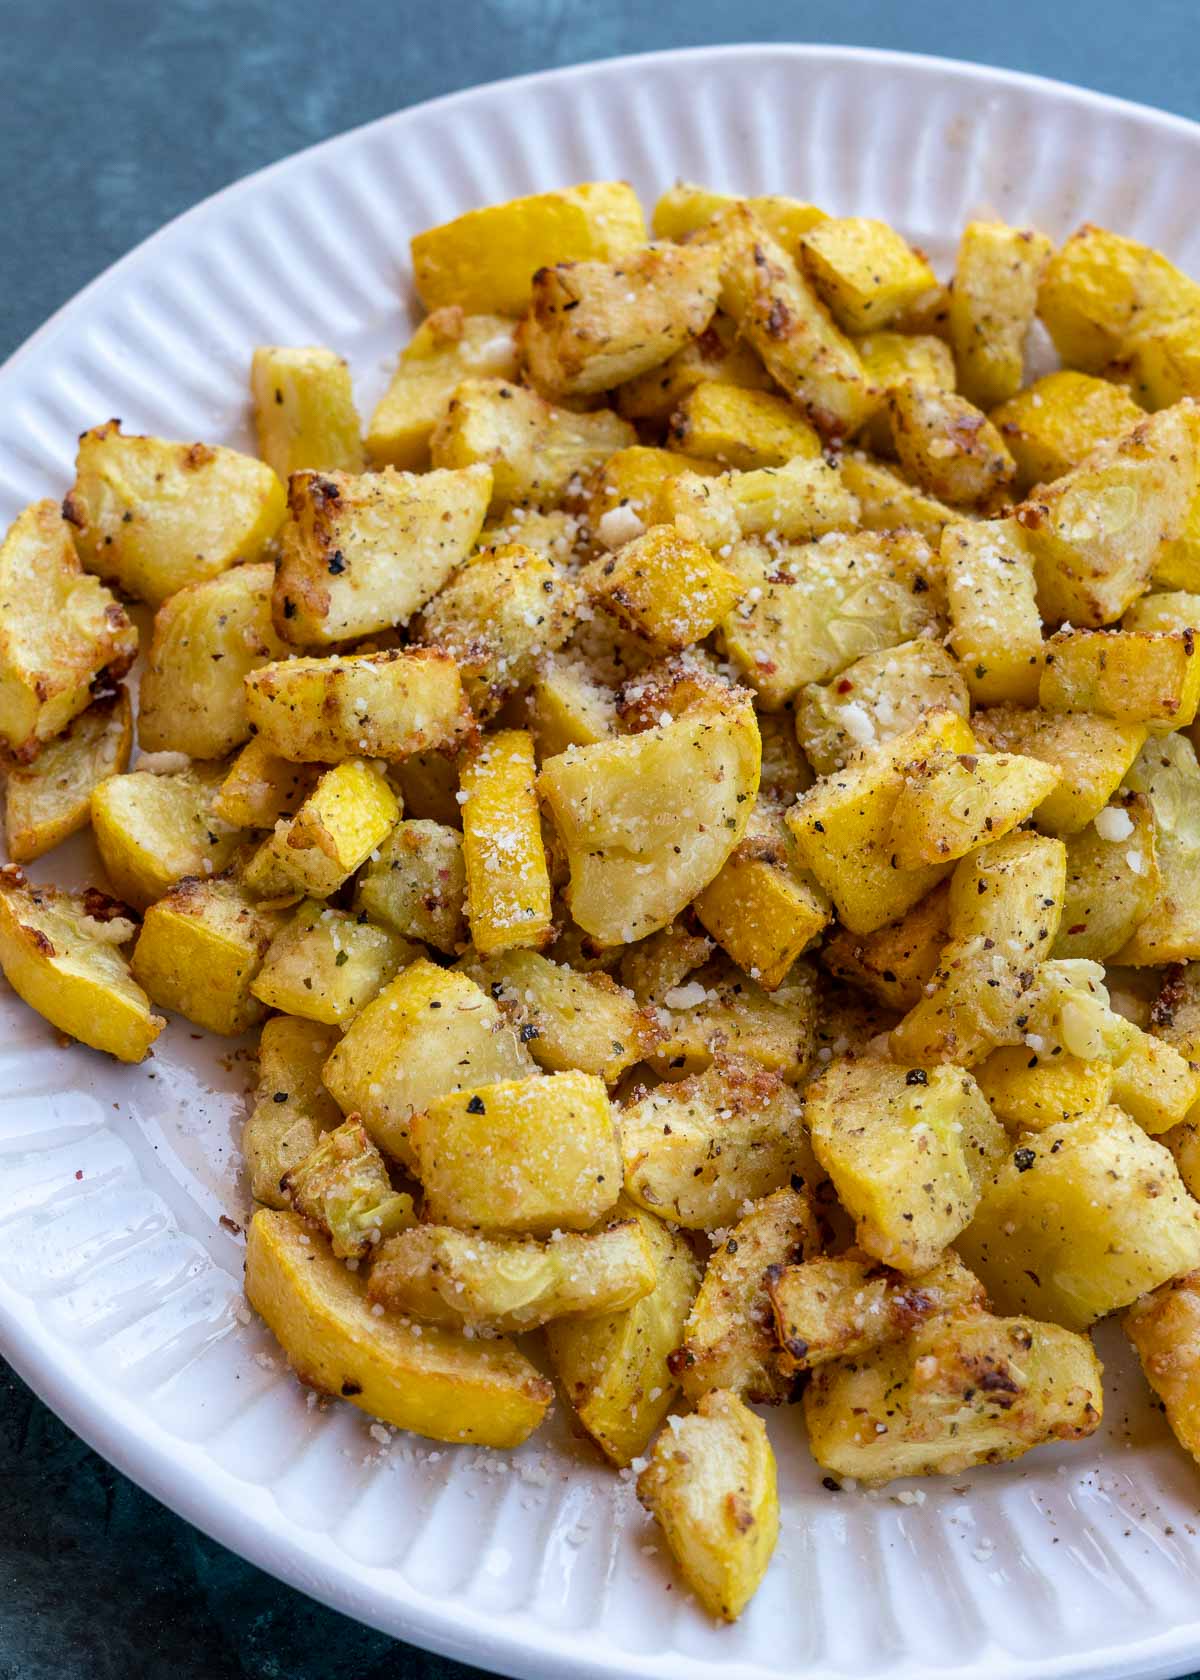 Fried squash on plate